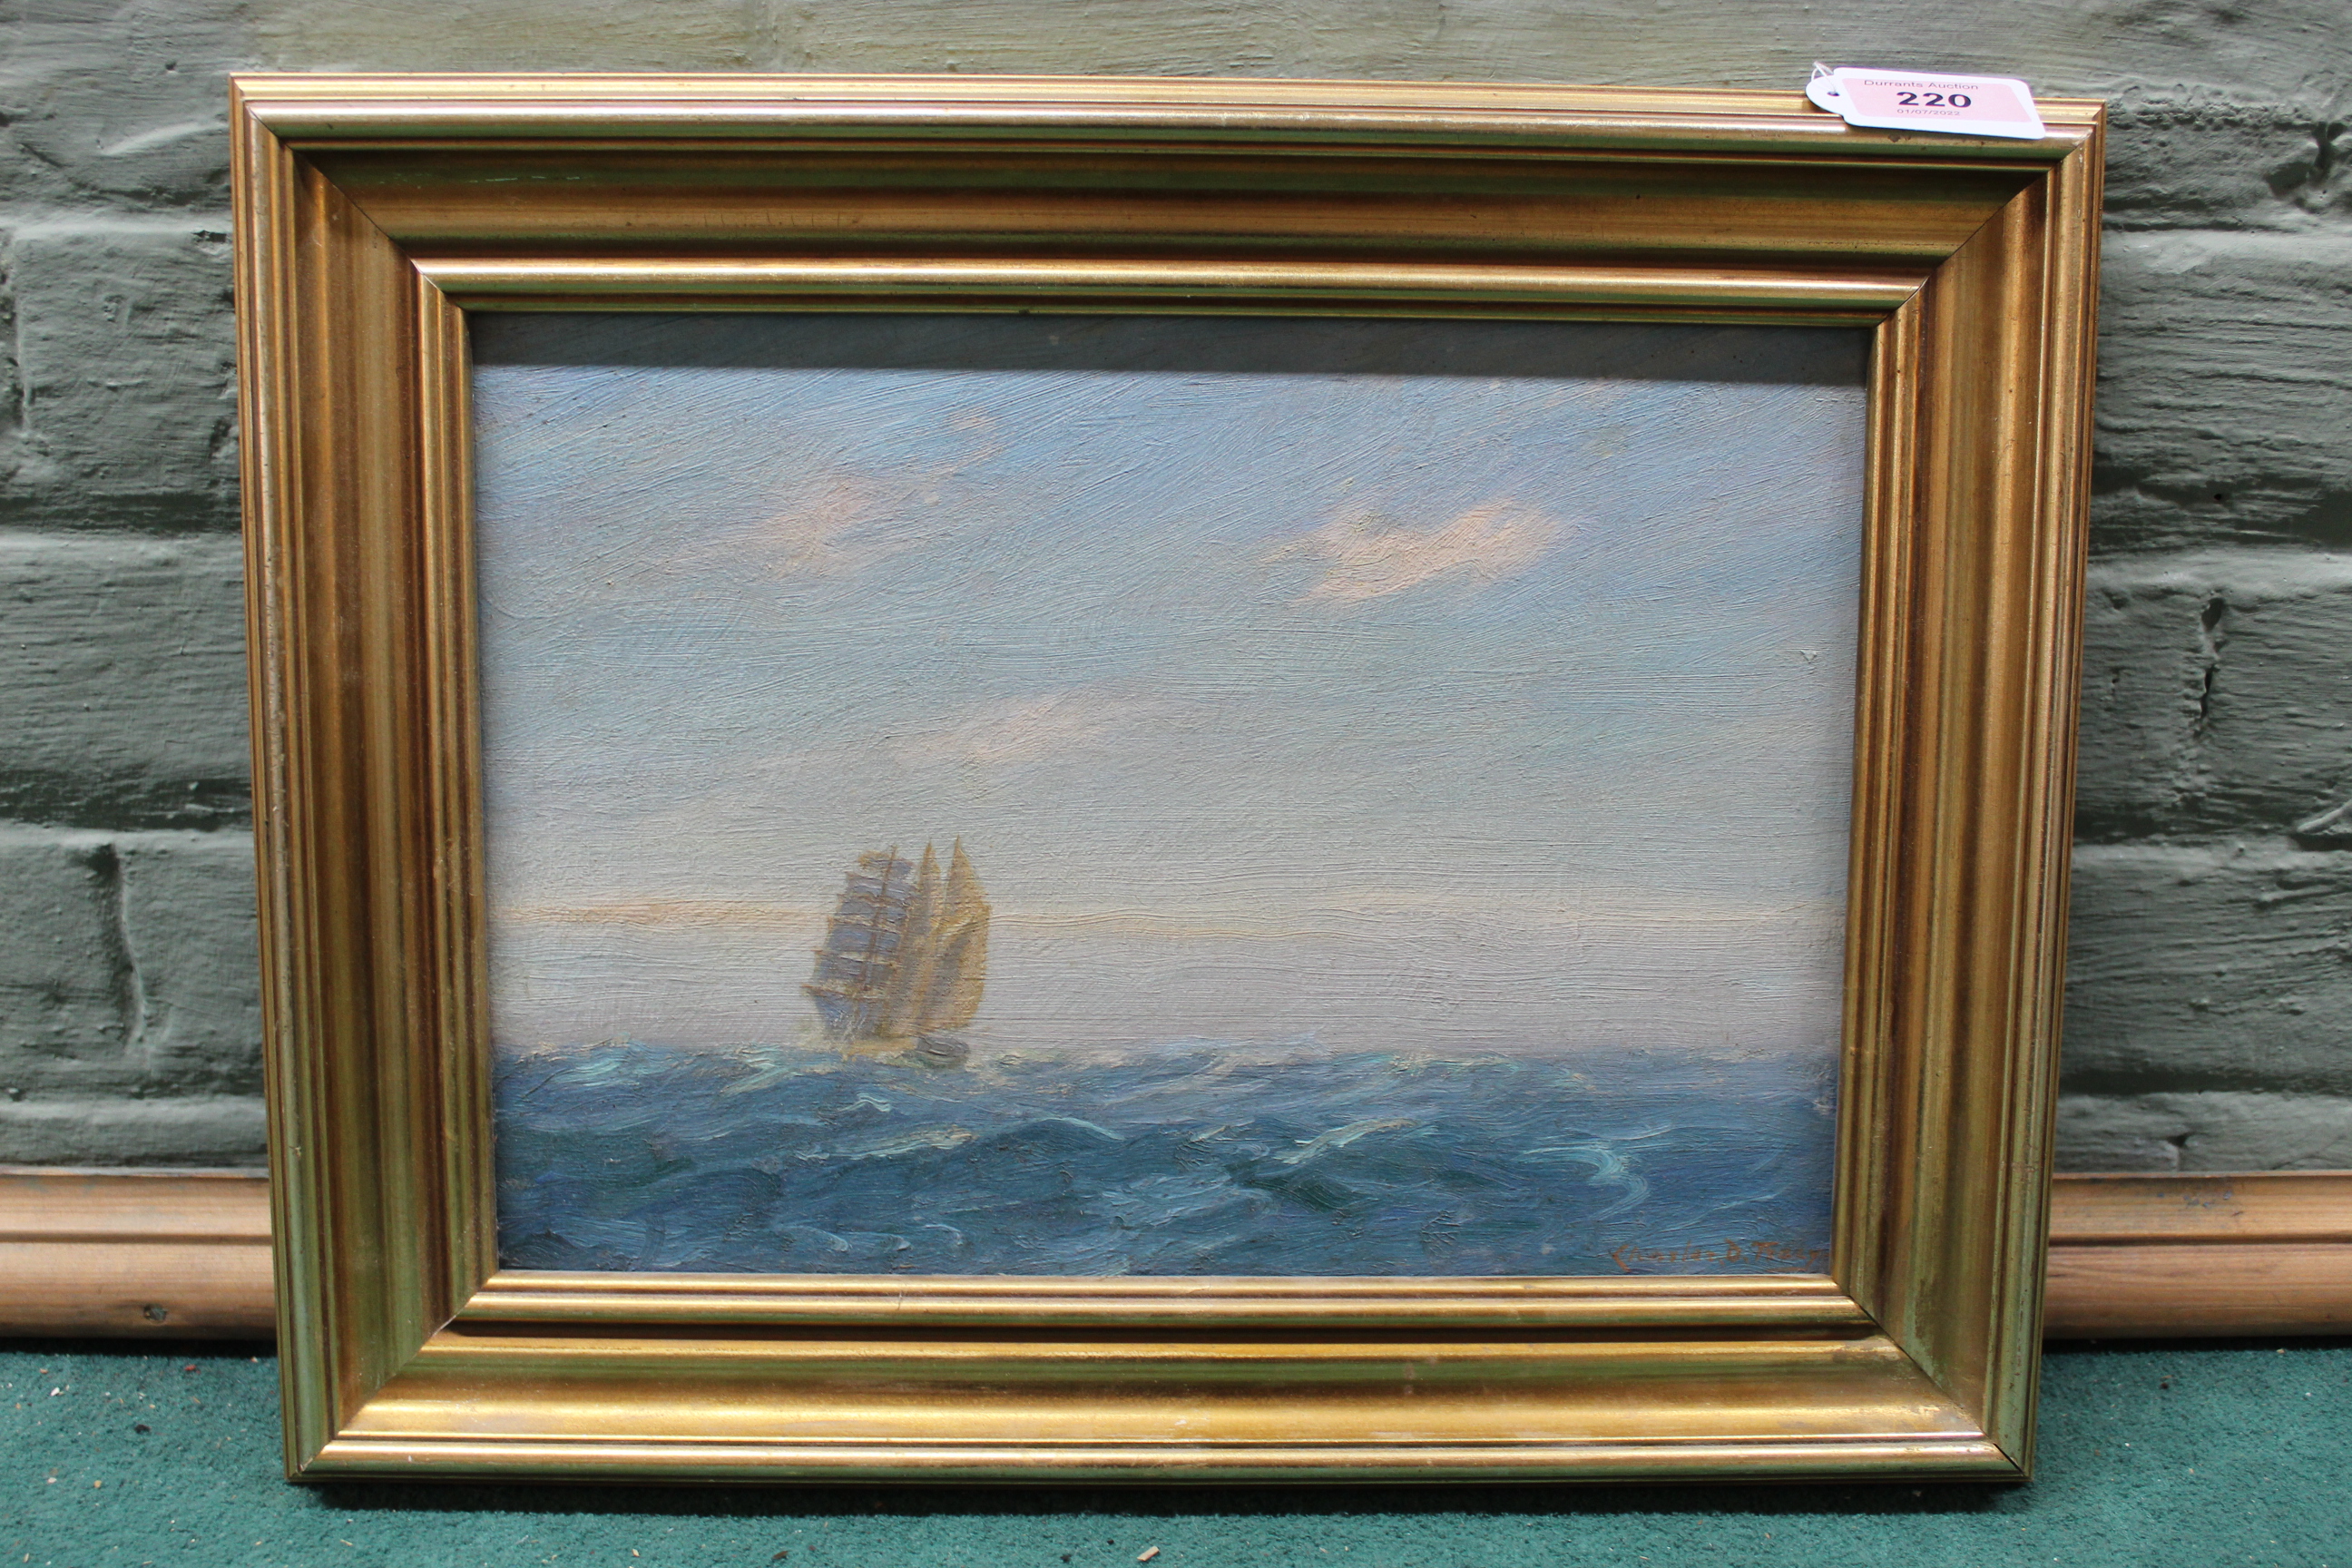 An oil on board of ships 'The White Barquentine' by Charles Dunlop Tracey',